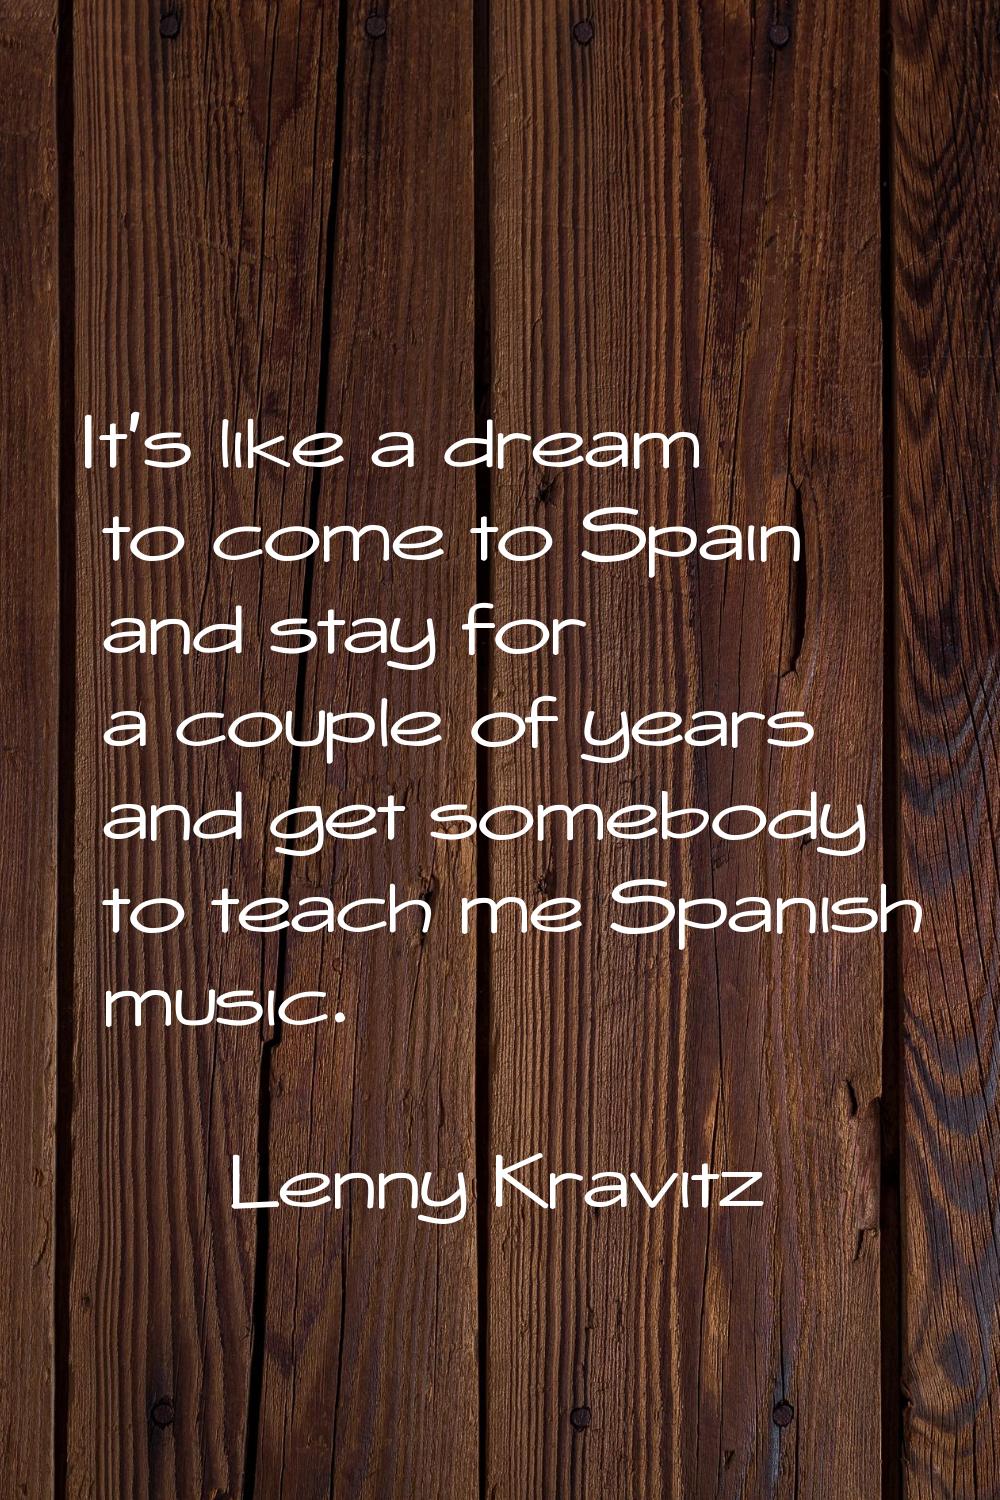 It's like a dream to come to Spain and stay for a couple of years and get somebody to teach me Span